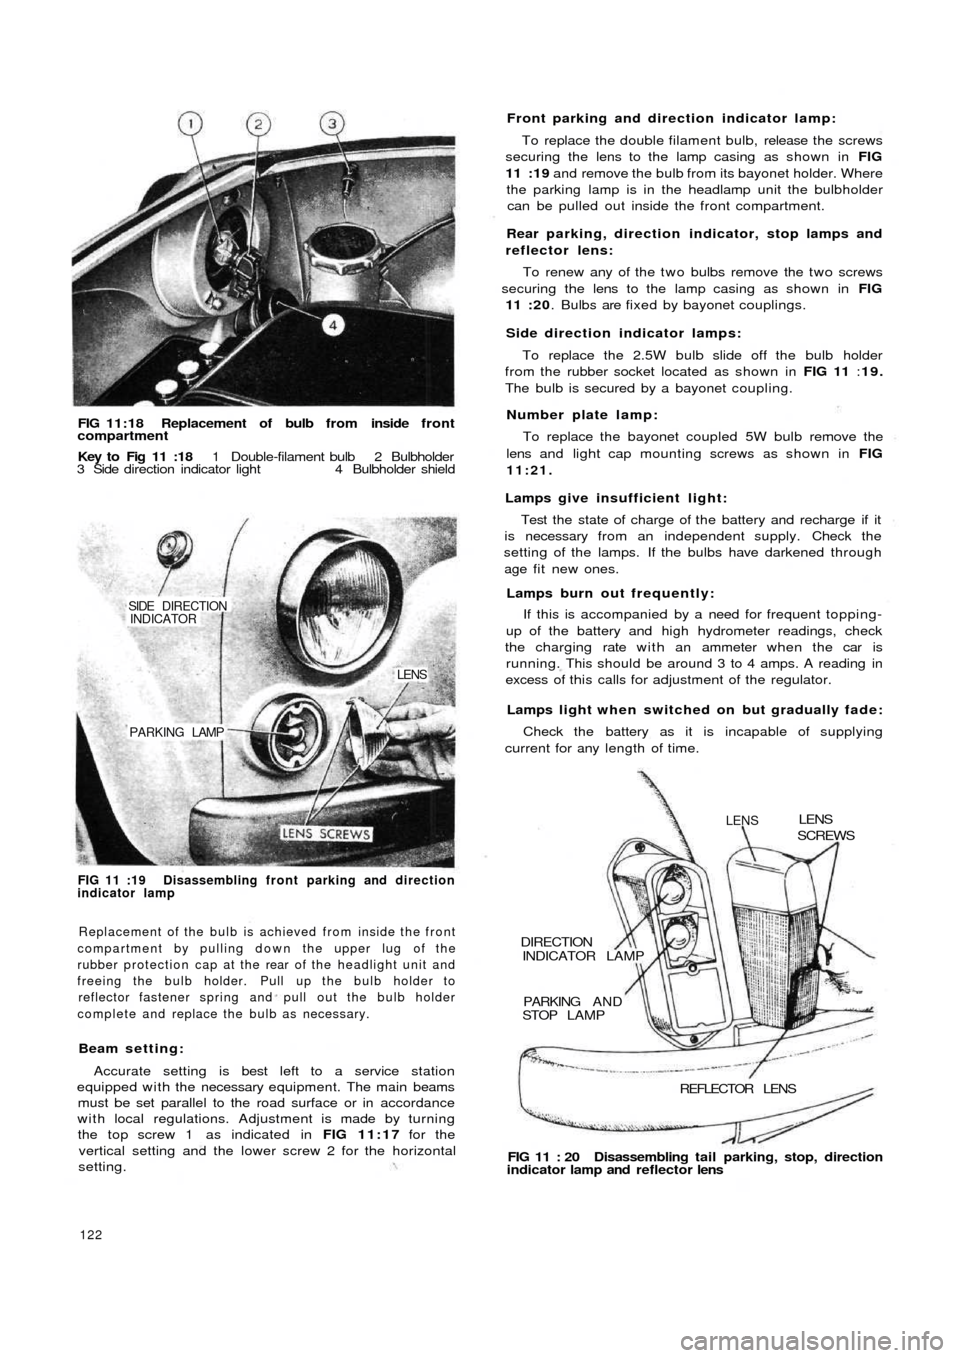 FIAT 500 1971 1.G Workshop Manual FIG 11:18 Replacement of bulb from inside f r o n tcompartment
Key to  Fig 11 :18 1 Double-filament bulb 2 Bulbholder
3 Side direction indicator light 4 Bulbholder shield
PARKING LAMP
LENS
SIDE  DIREC